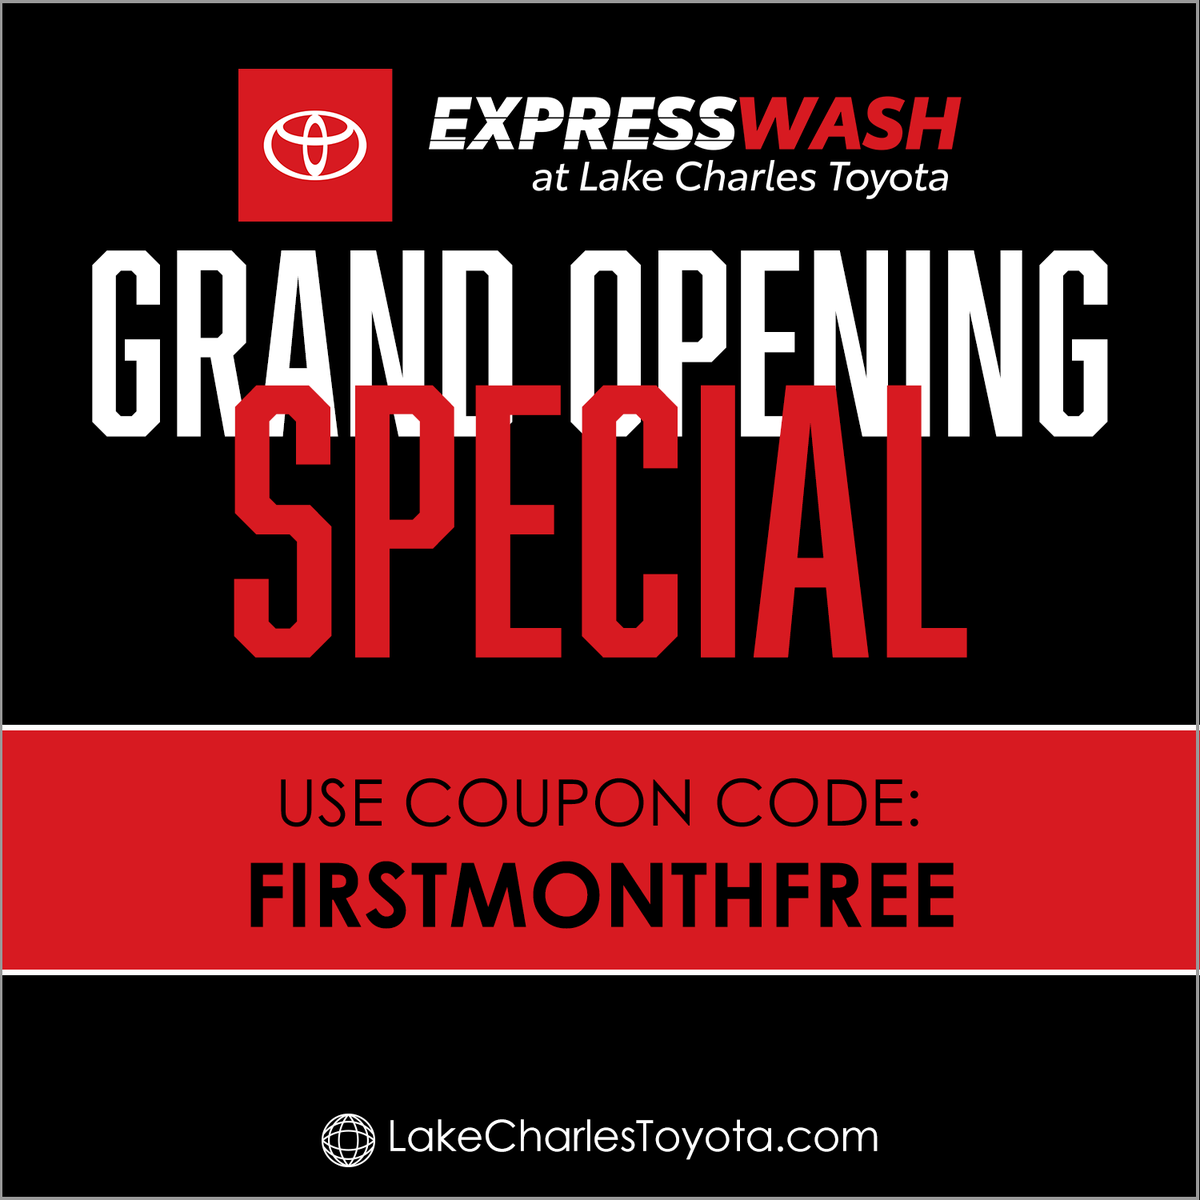 Sign up for any level of our Unlimited Wash Club - use the coupon code 'FirstMonthFree' and your first month of unlimited washes are on us!! ExpressWash is open to the public and all models of cars, trucks and suvs. #RaiseYourExpectations.